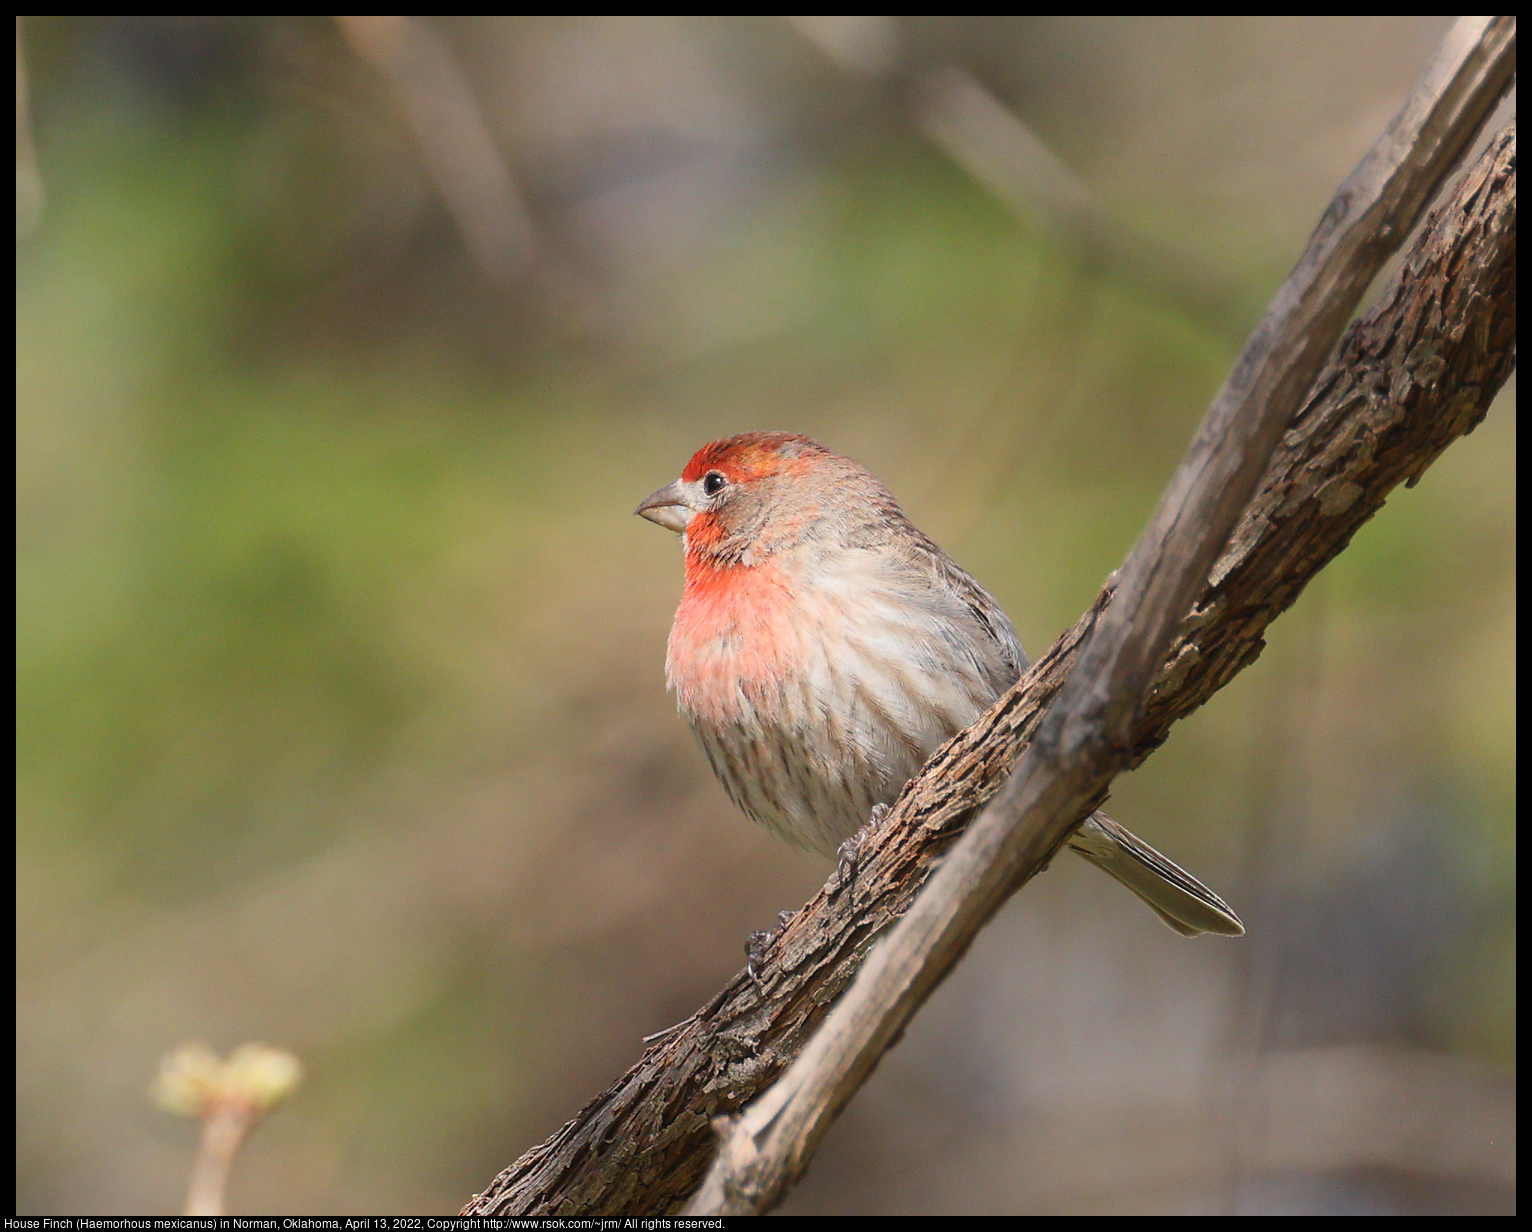 House Finch (Haemorhous mexicanus) in Norman, Oklahoma, April 13, 2022